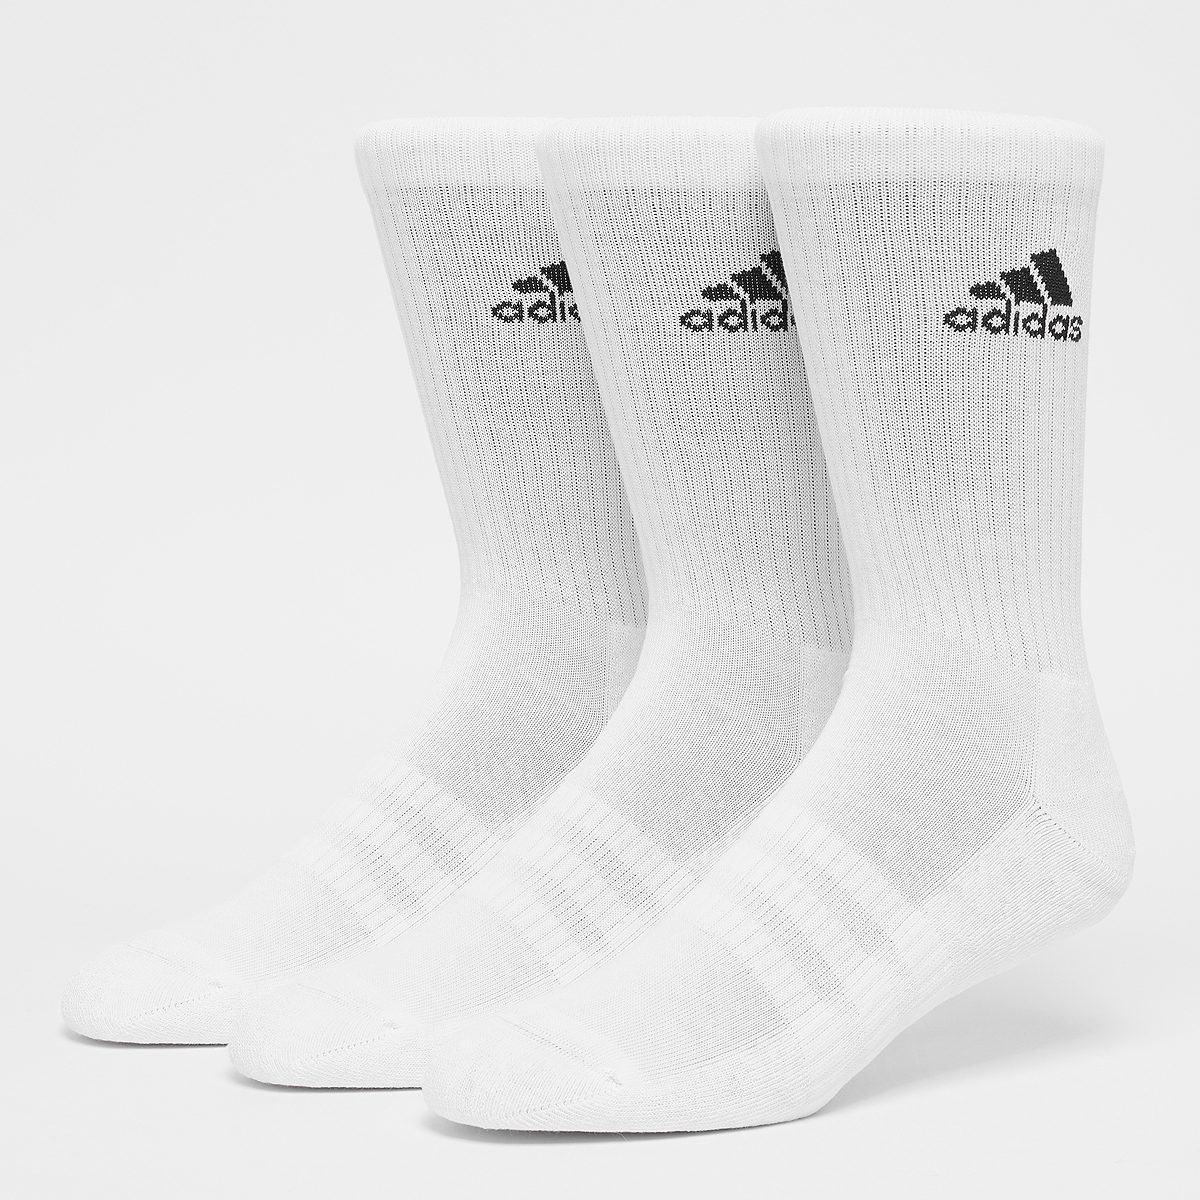 Chaussettes Crew Sportswear (3 Pack)